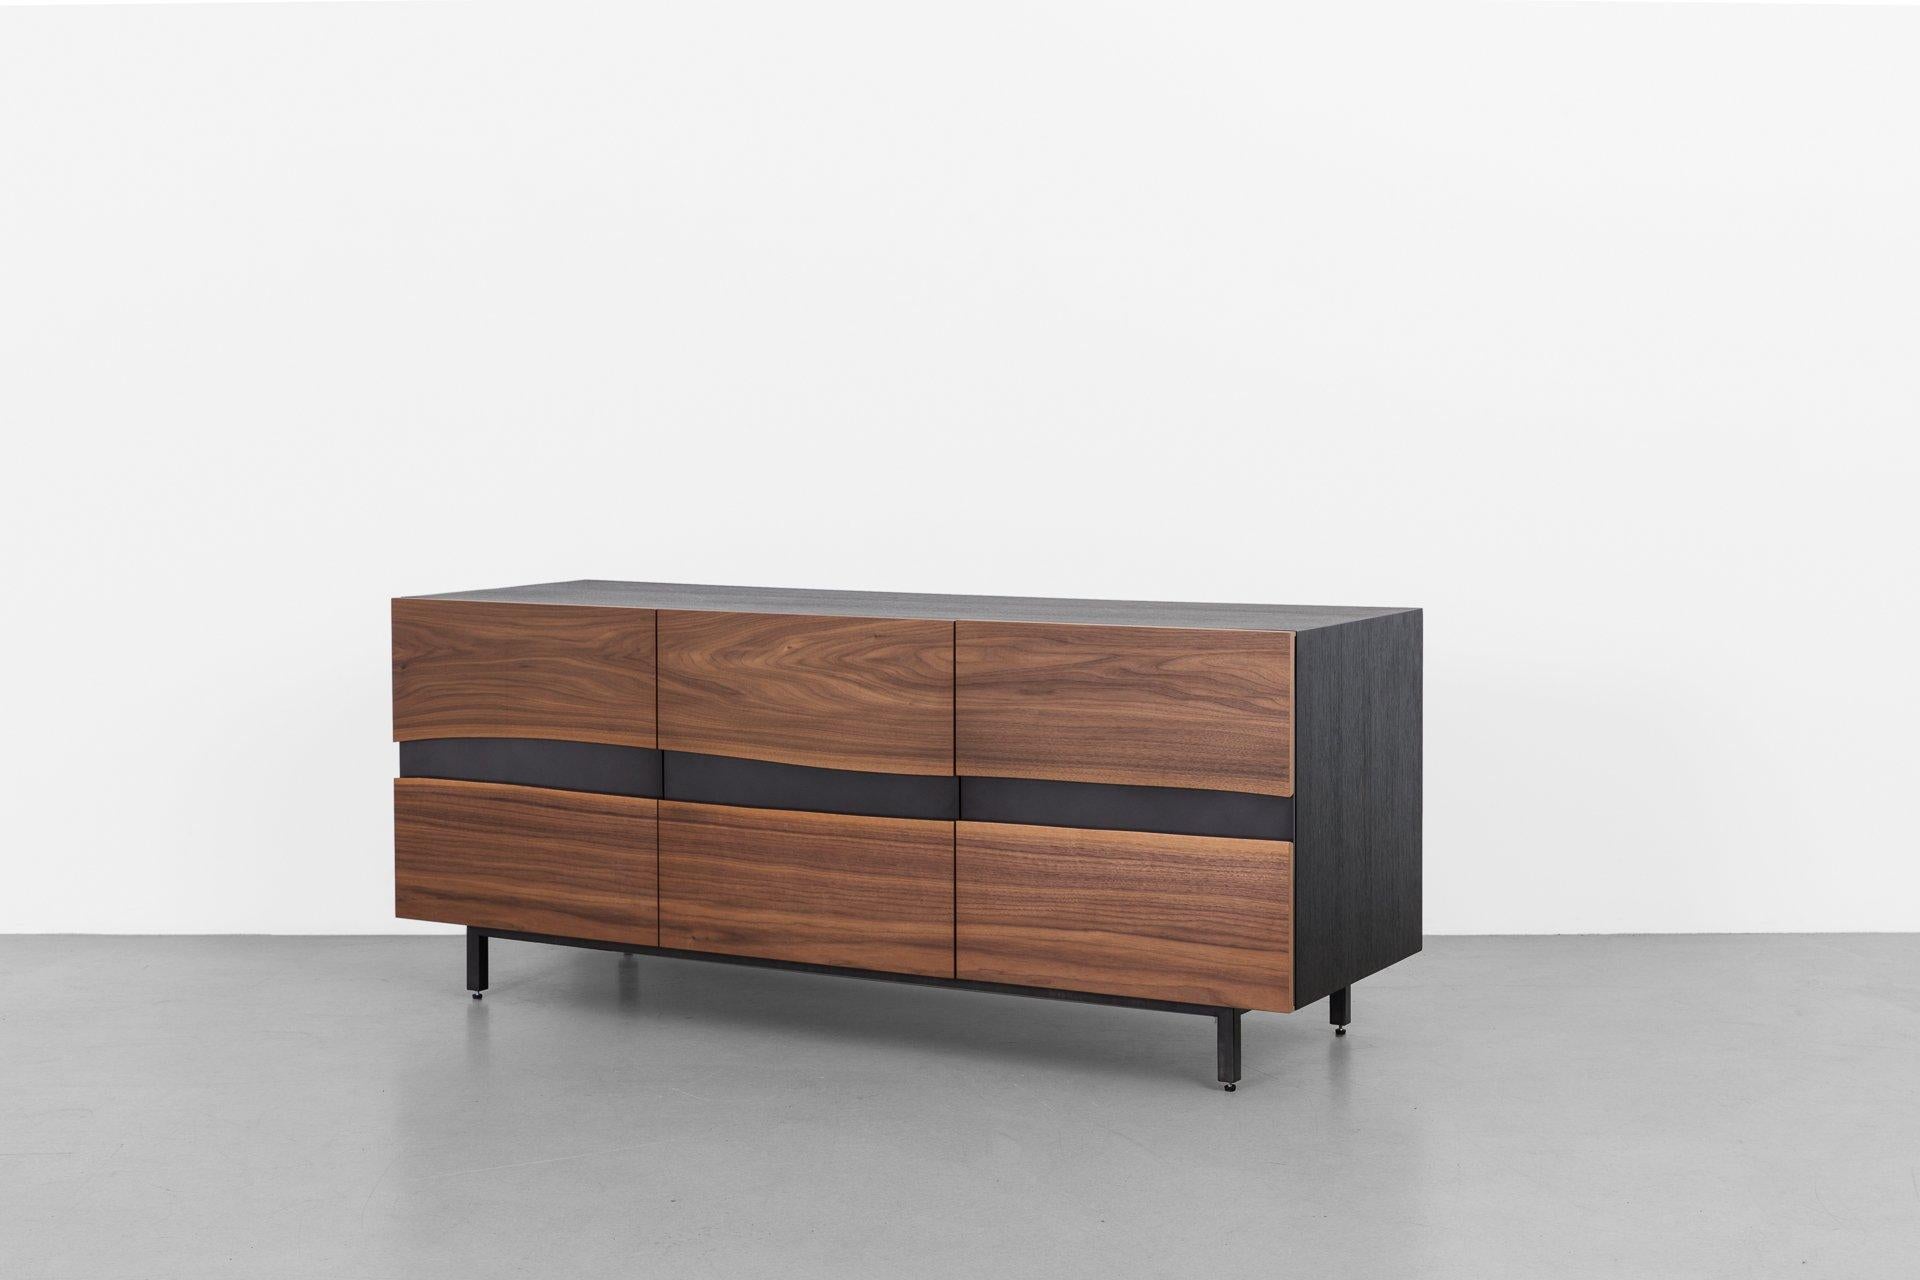 Our Summit credenza features two facing walnut live edges mounted on aluminum doors that create its dynamic front. Three seamless doors open to adjustable interior shelving, allowing for custom storage arrangements. The surrounding frame is finished